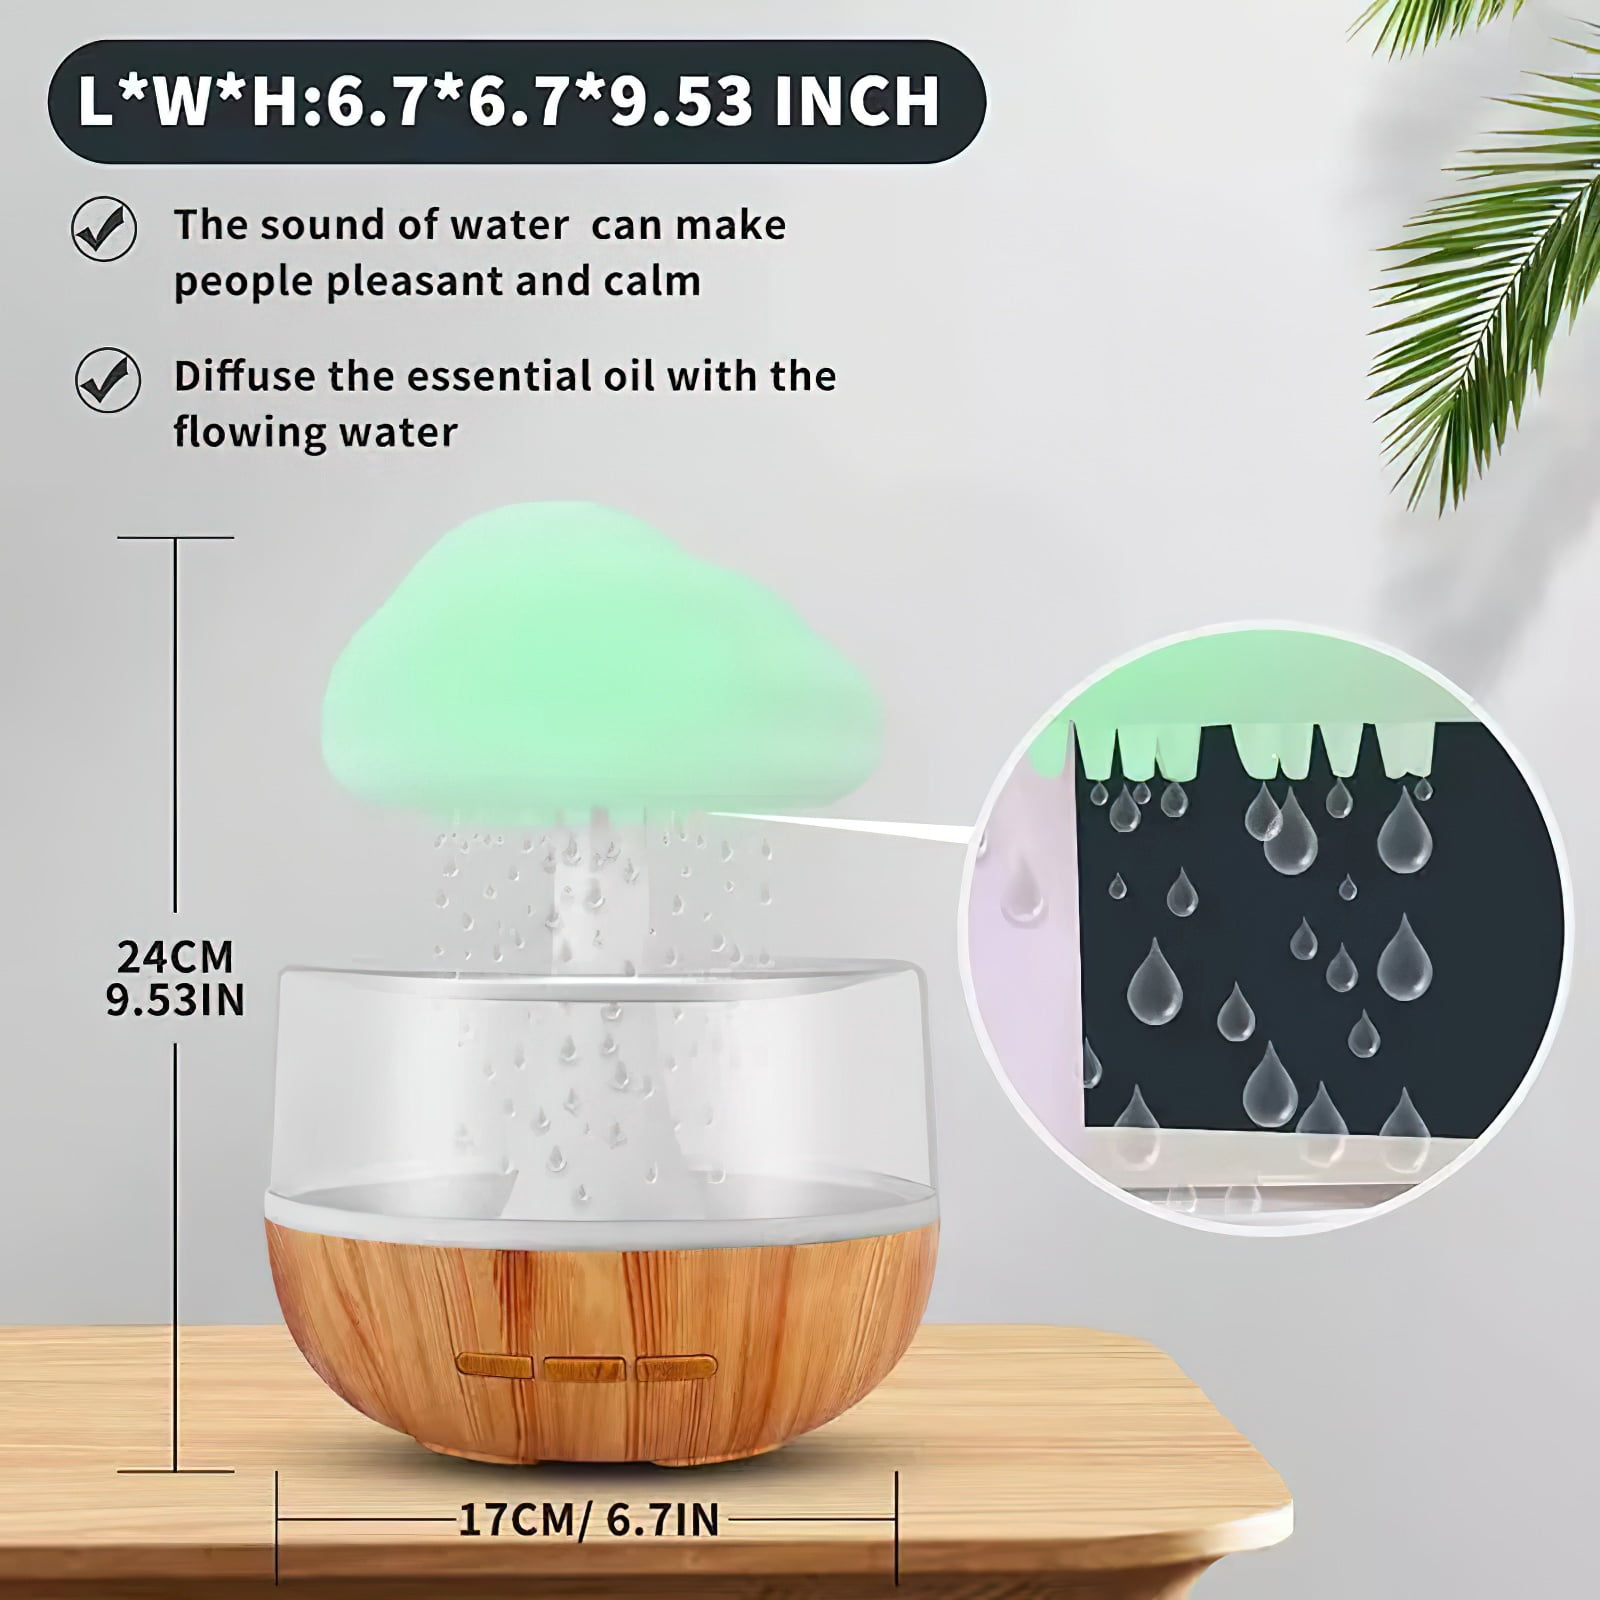 Mushroom Humidifier Waterfall Lamp :- Products Linke In Bio 🔹Like  🔸Comment 🔹Share 🔸Follow :- @televisioncreator #amazing #gadgets #ho…